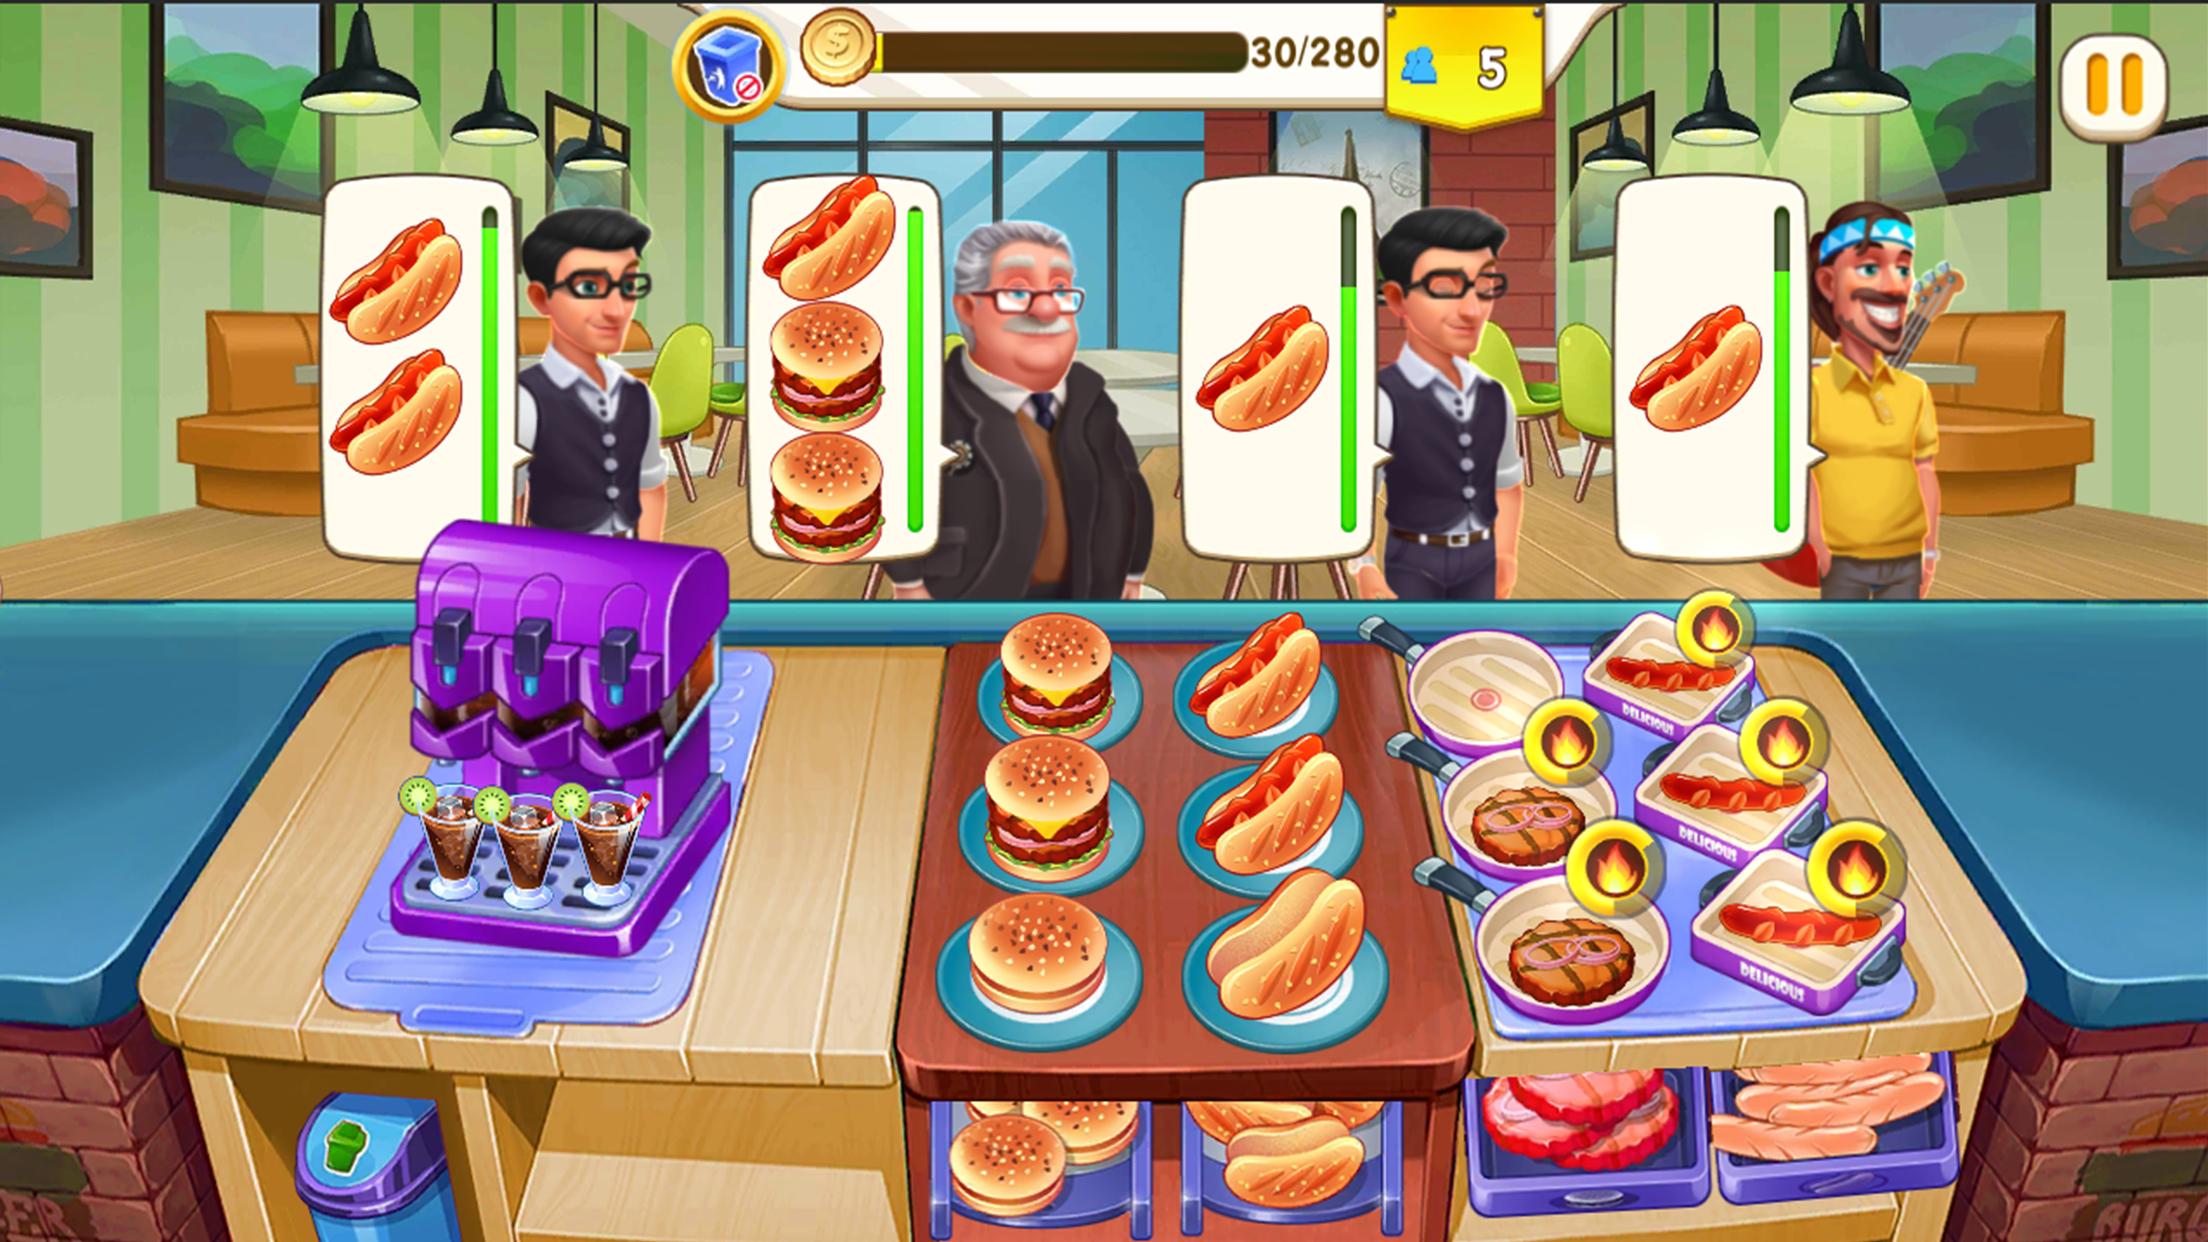 Cooking Rush Bake it to delicious 2.1.2 Screenshot 15